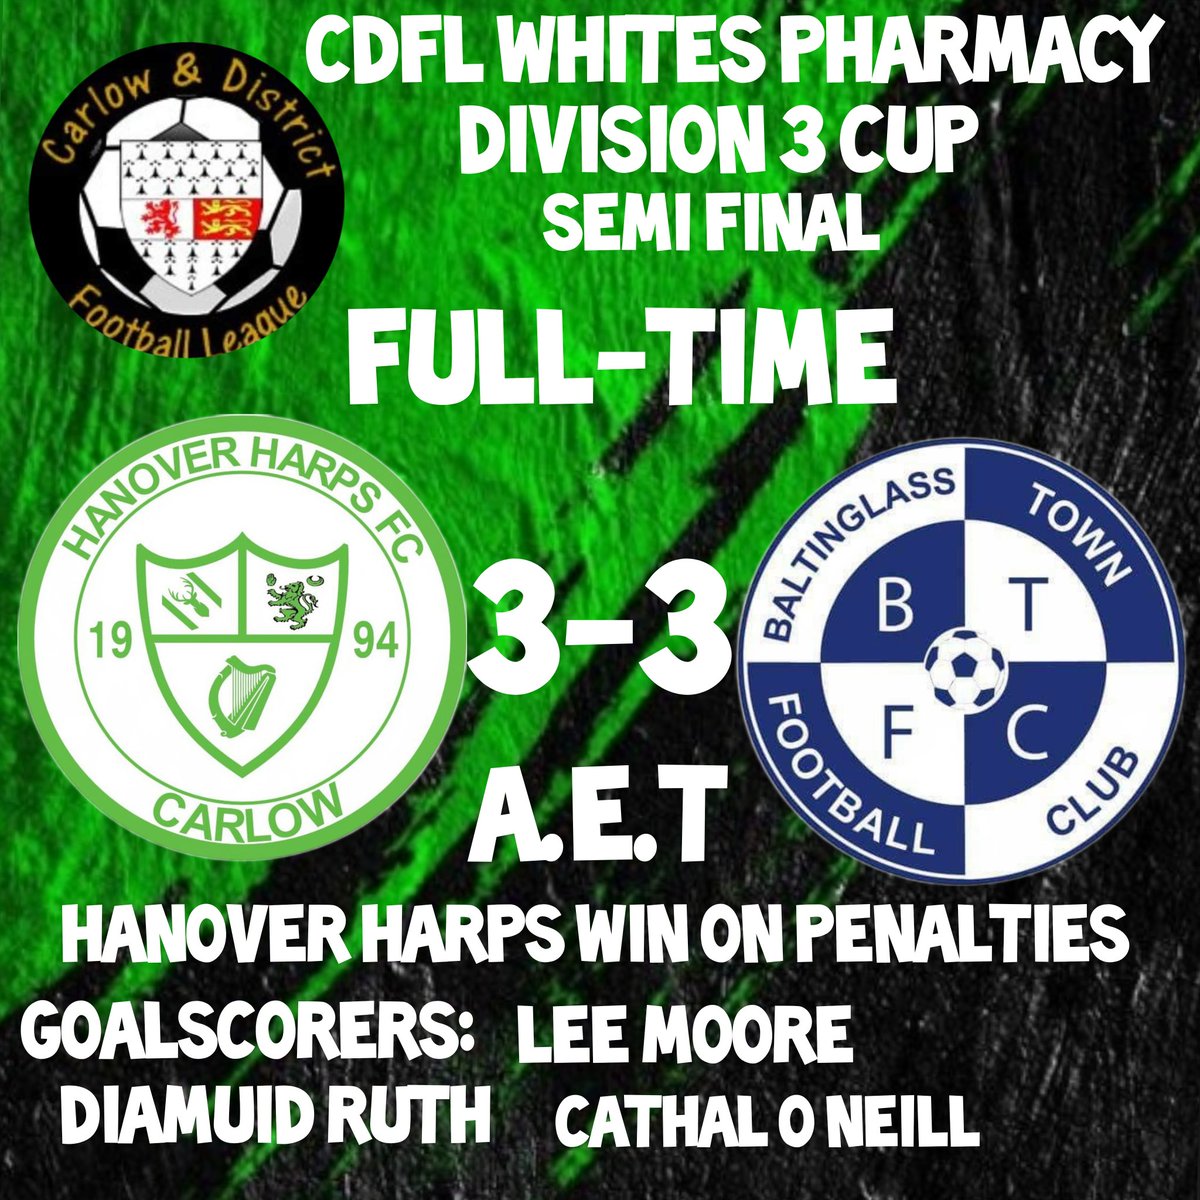 Hanover Harps ARE IN THE DIVISION 3 CUP FINAL, Well done lads. @harrysarticles @CarlowSoccer @scorelinesport